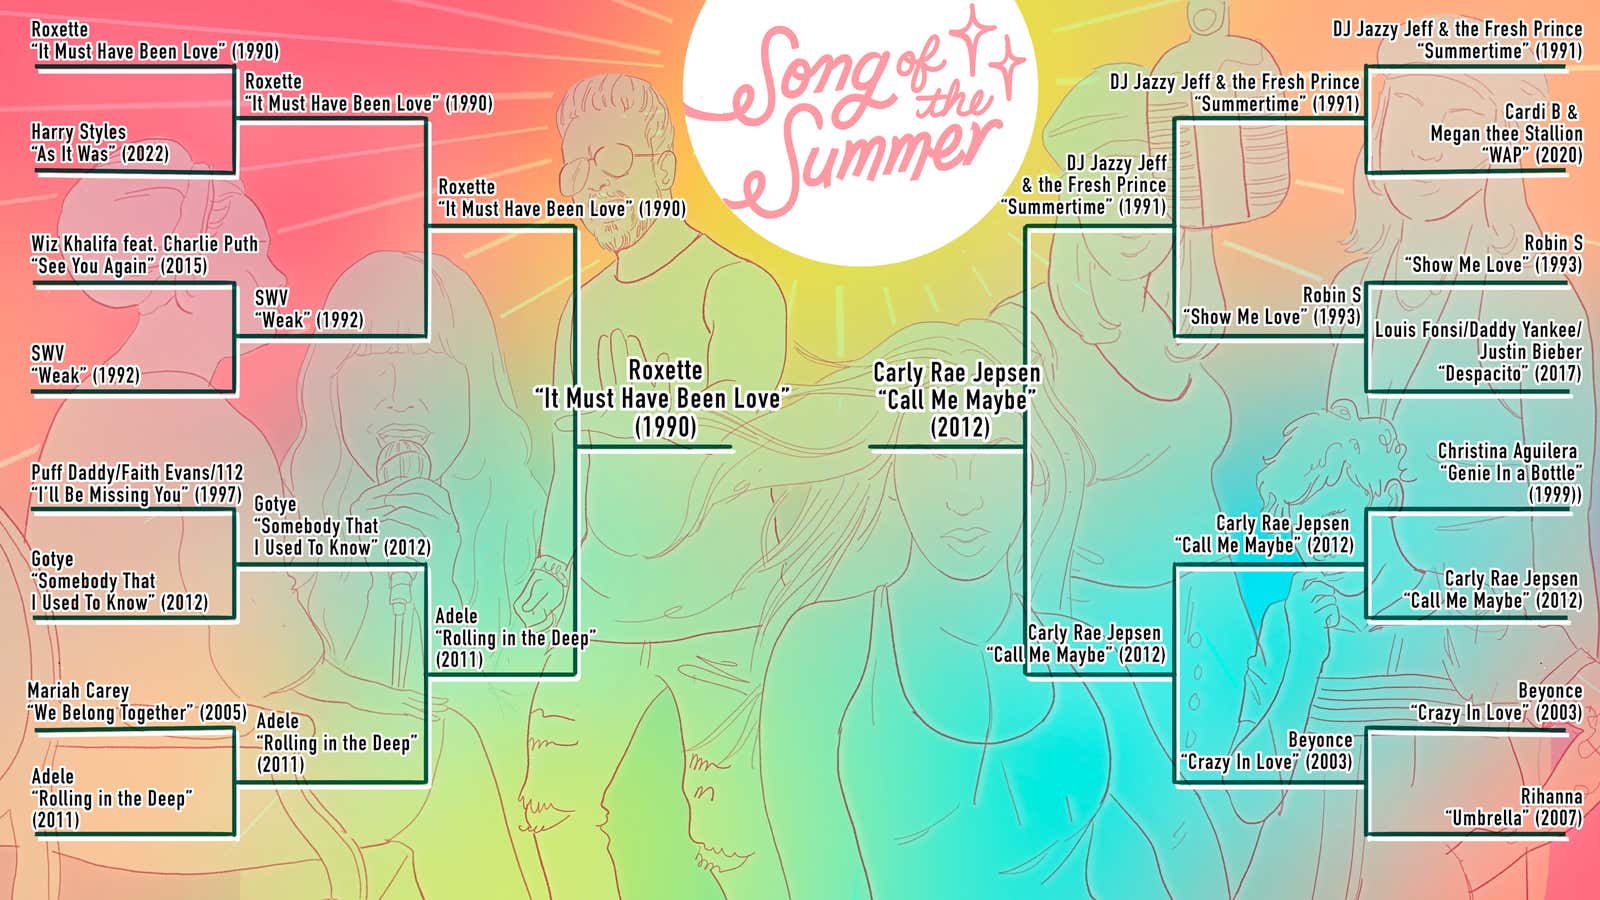 Jezebel's Song of the Summer Final Round: It's 2012 vs. 1990 for the Official Summer Jam